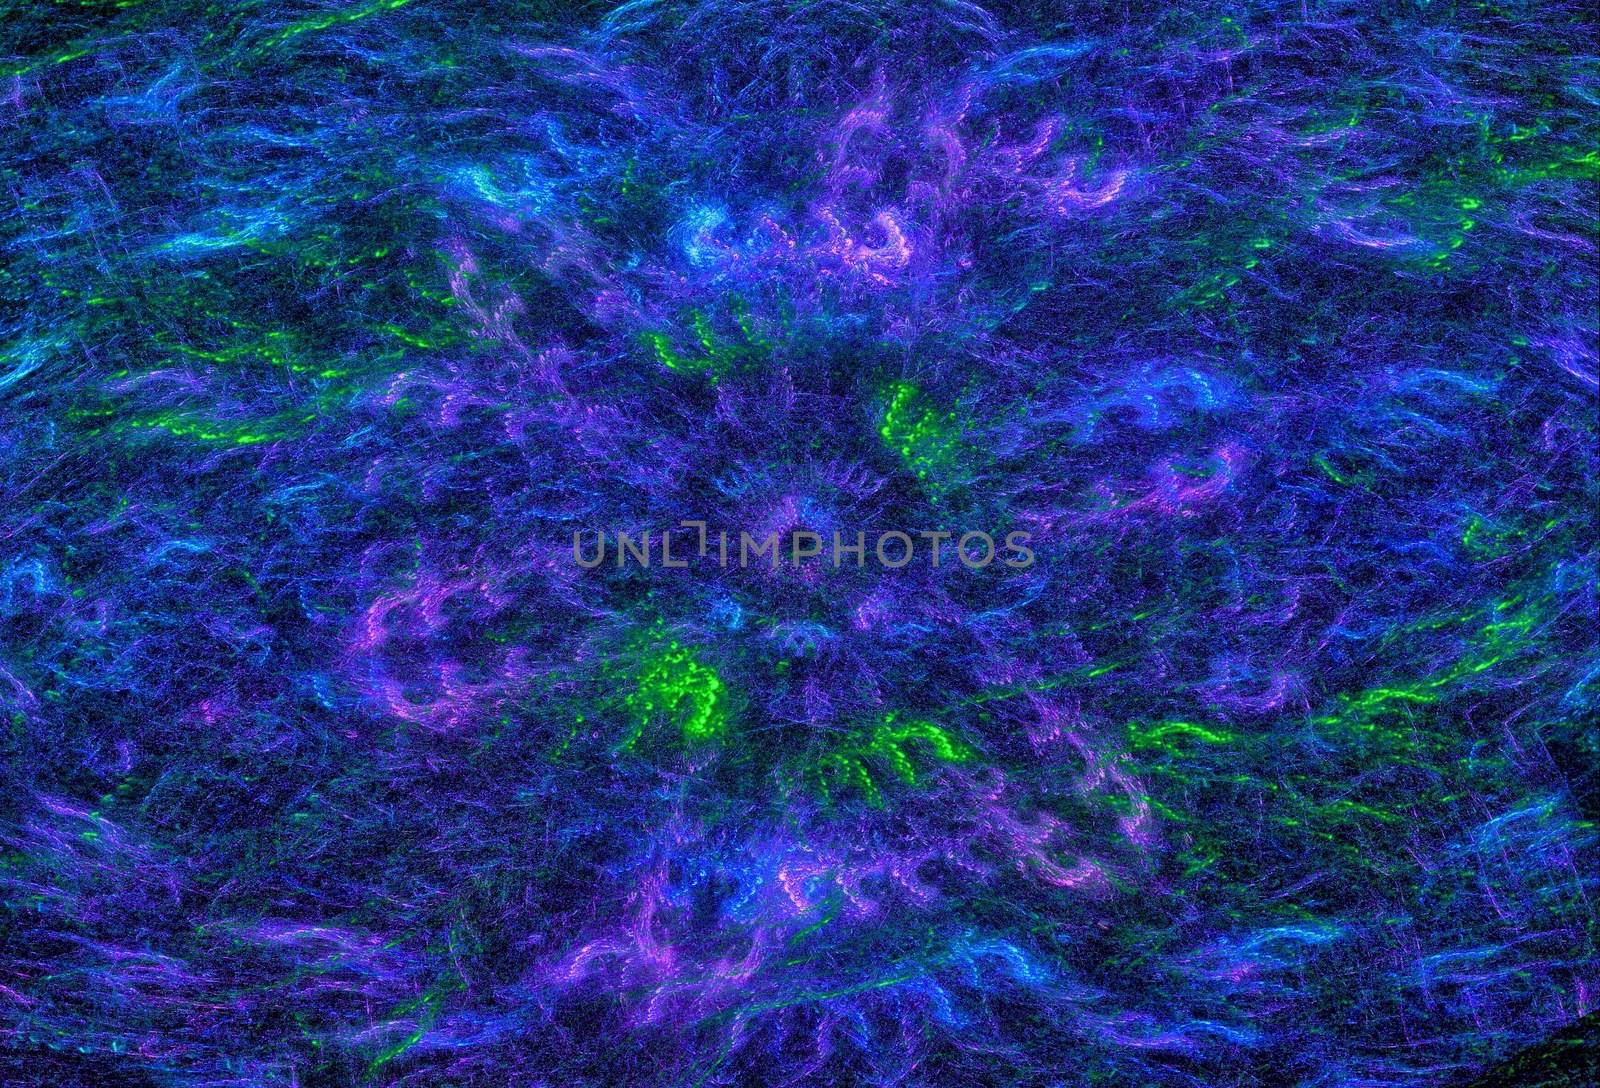 Digital Art: Fractal Graphics: The Chaos Sea of Binary Stars. Fantastic Wallpaper / Background / Scene Design. Sci-Fi / Abstract Style.